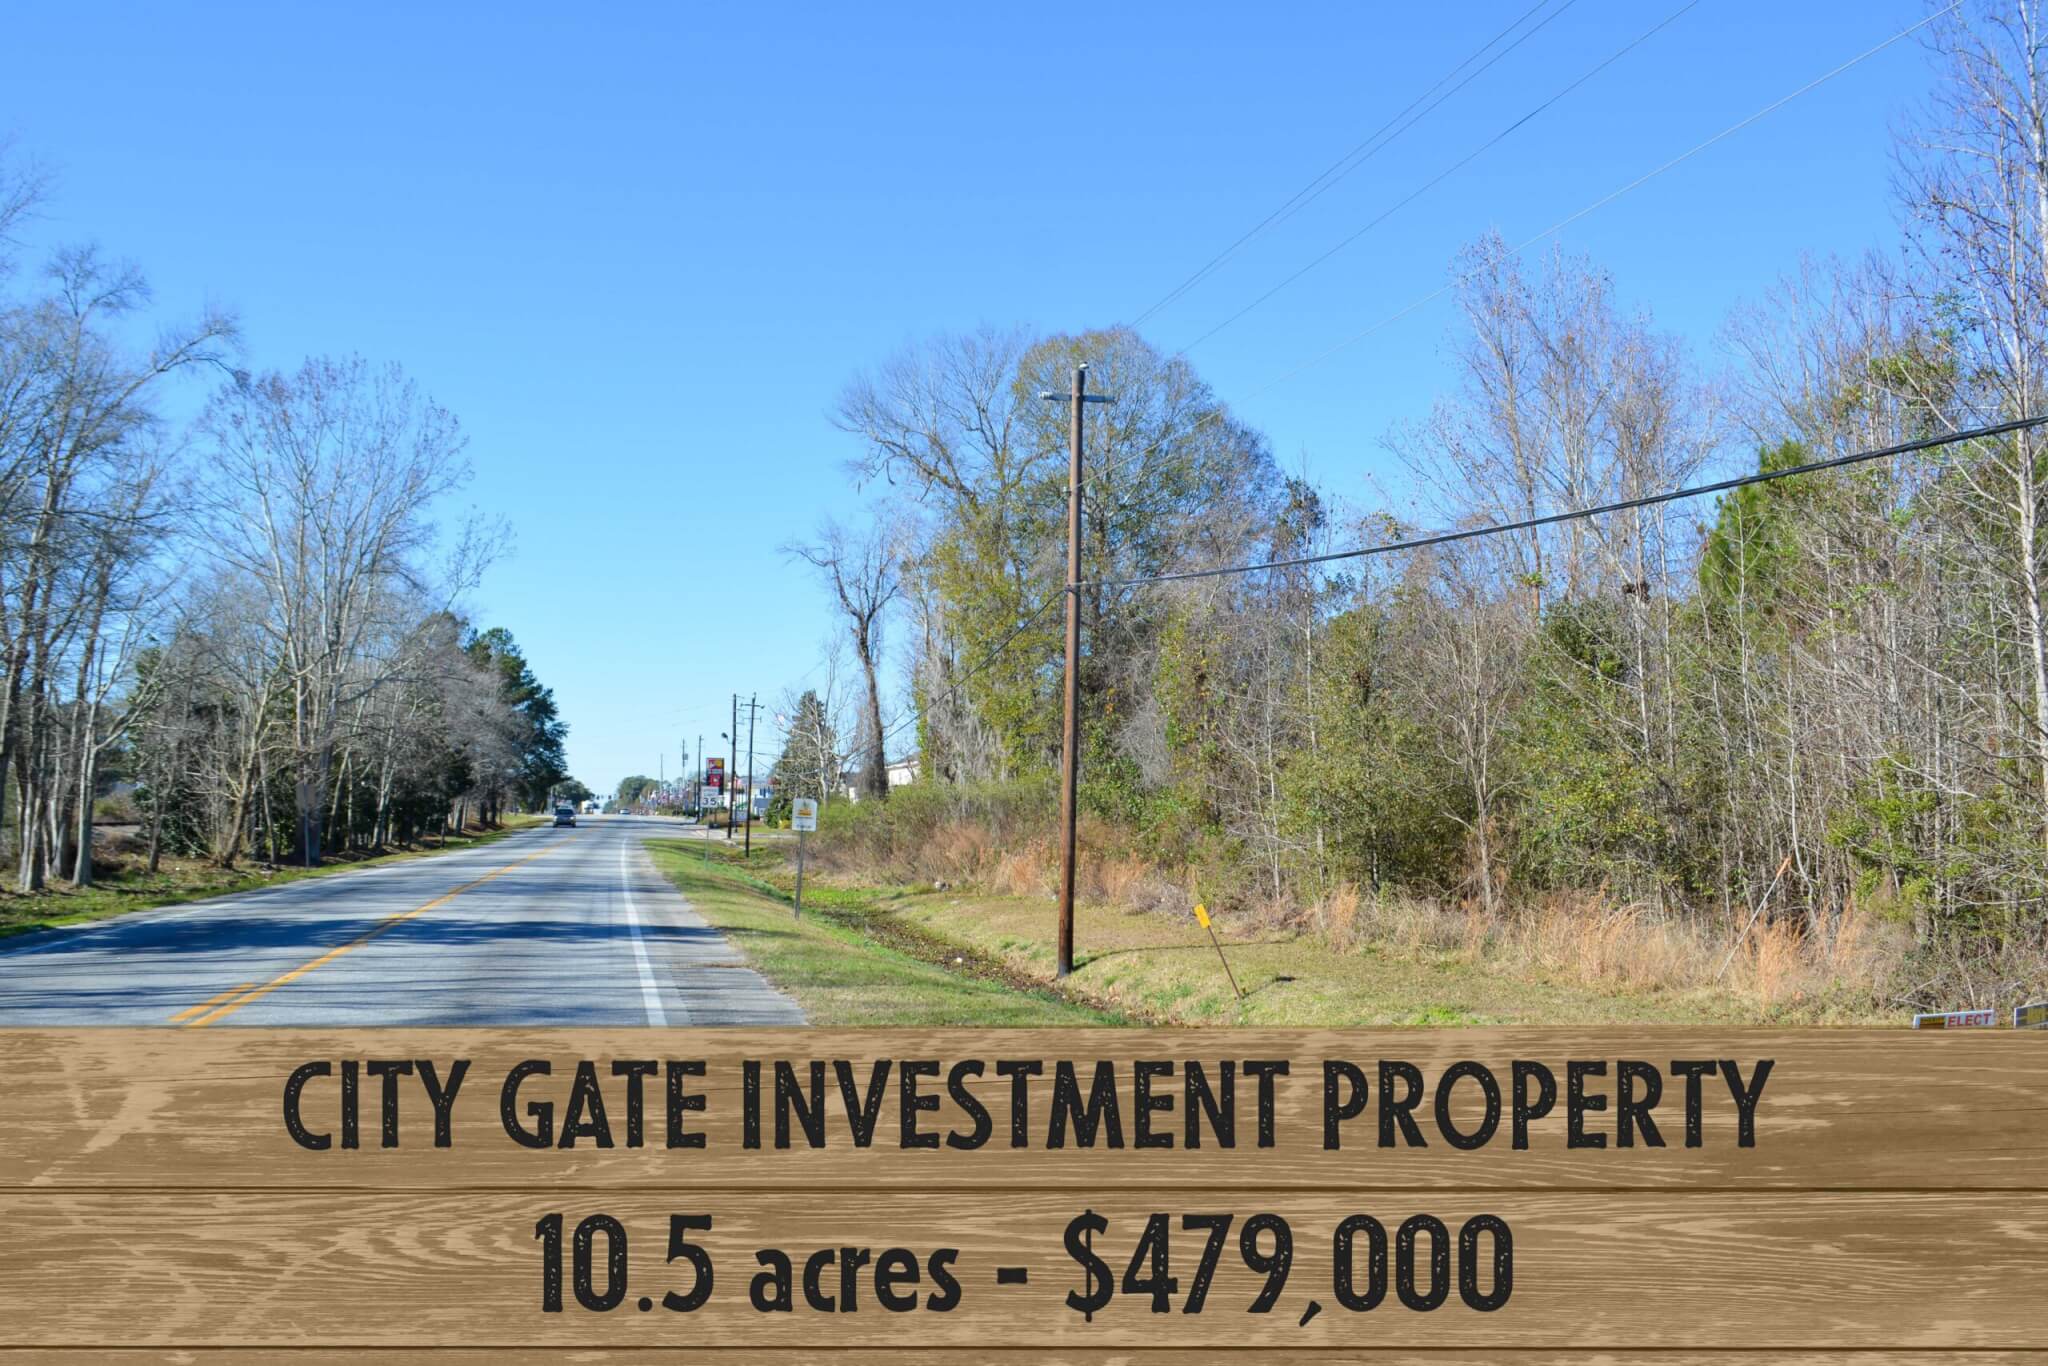 City Gate Investment Property